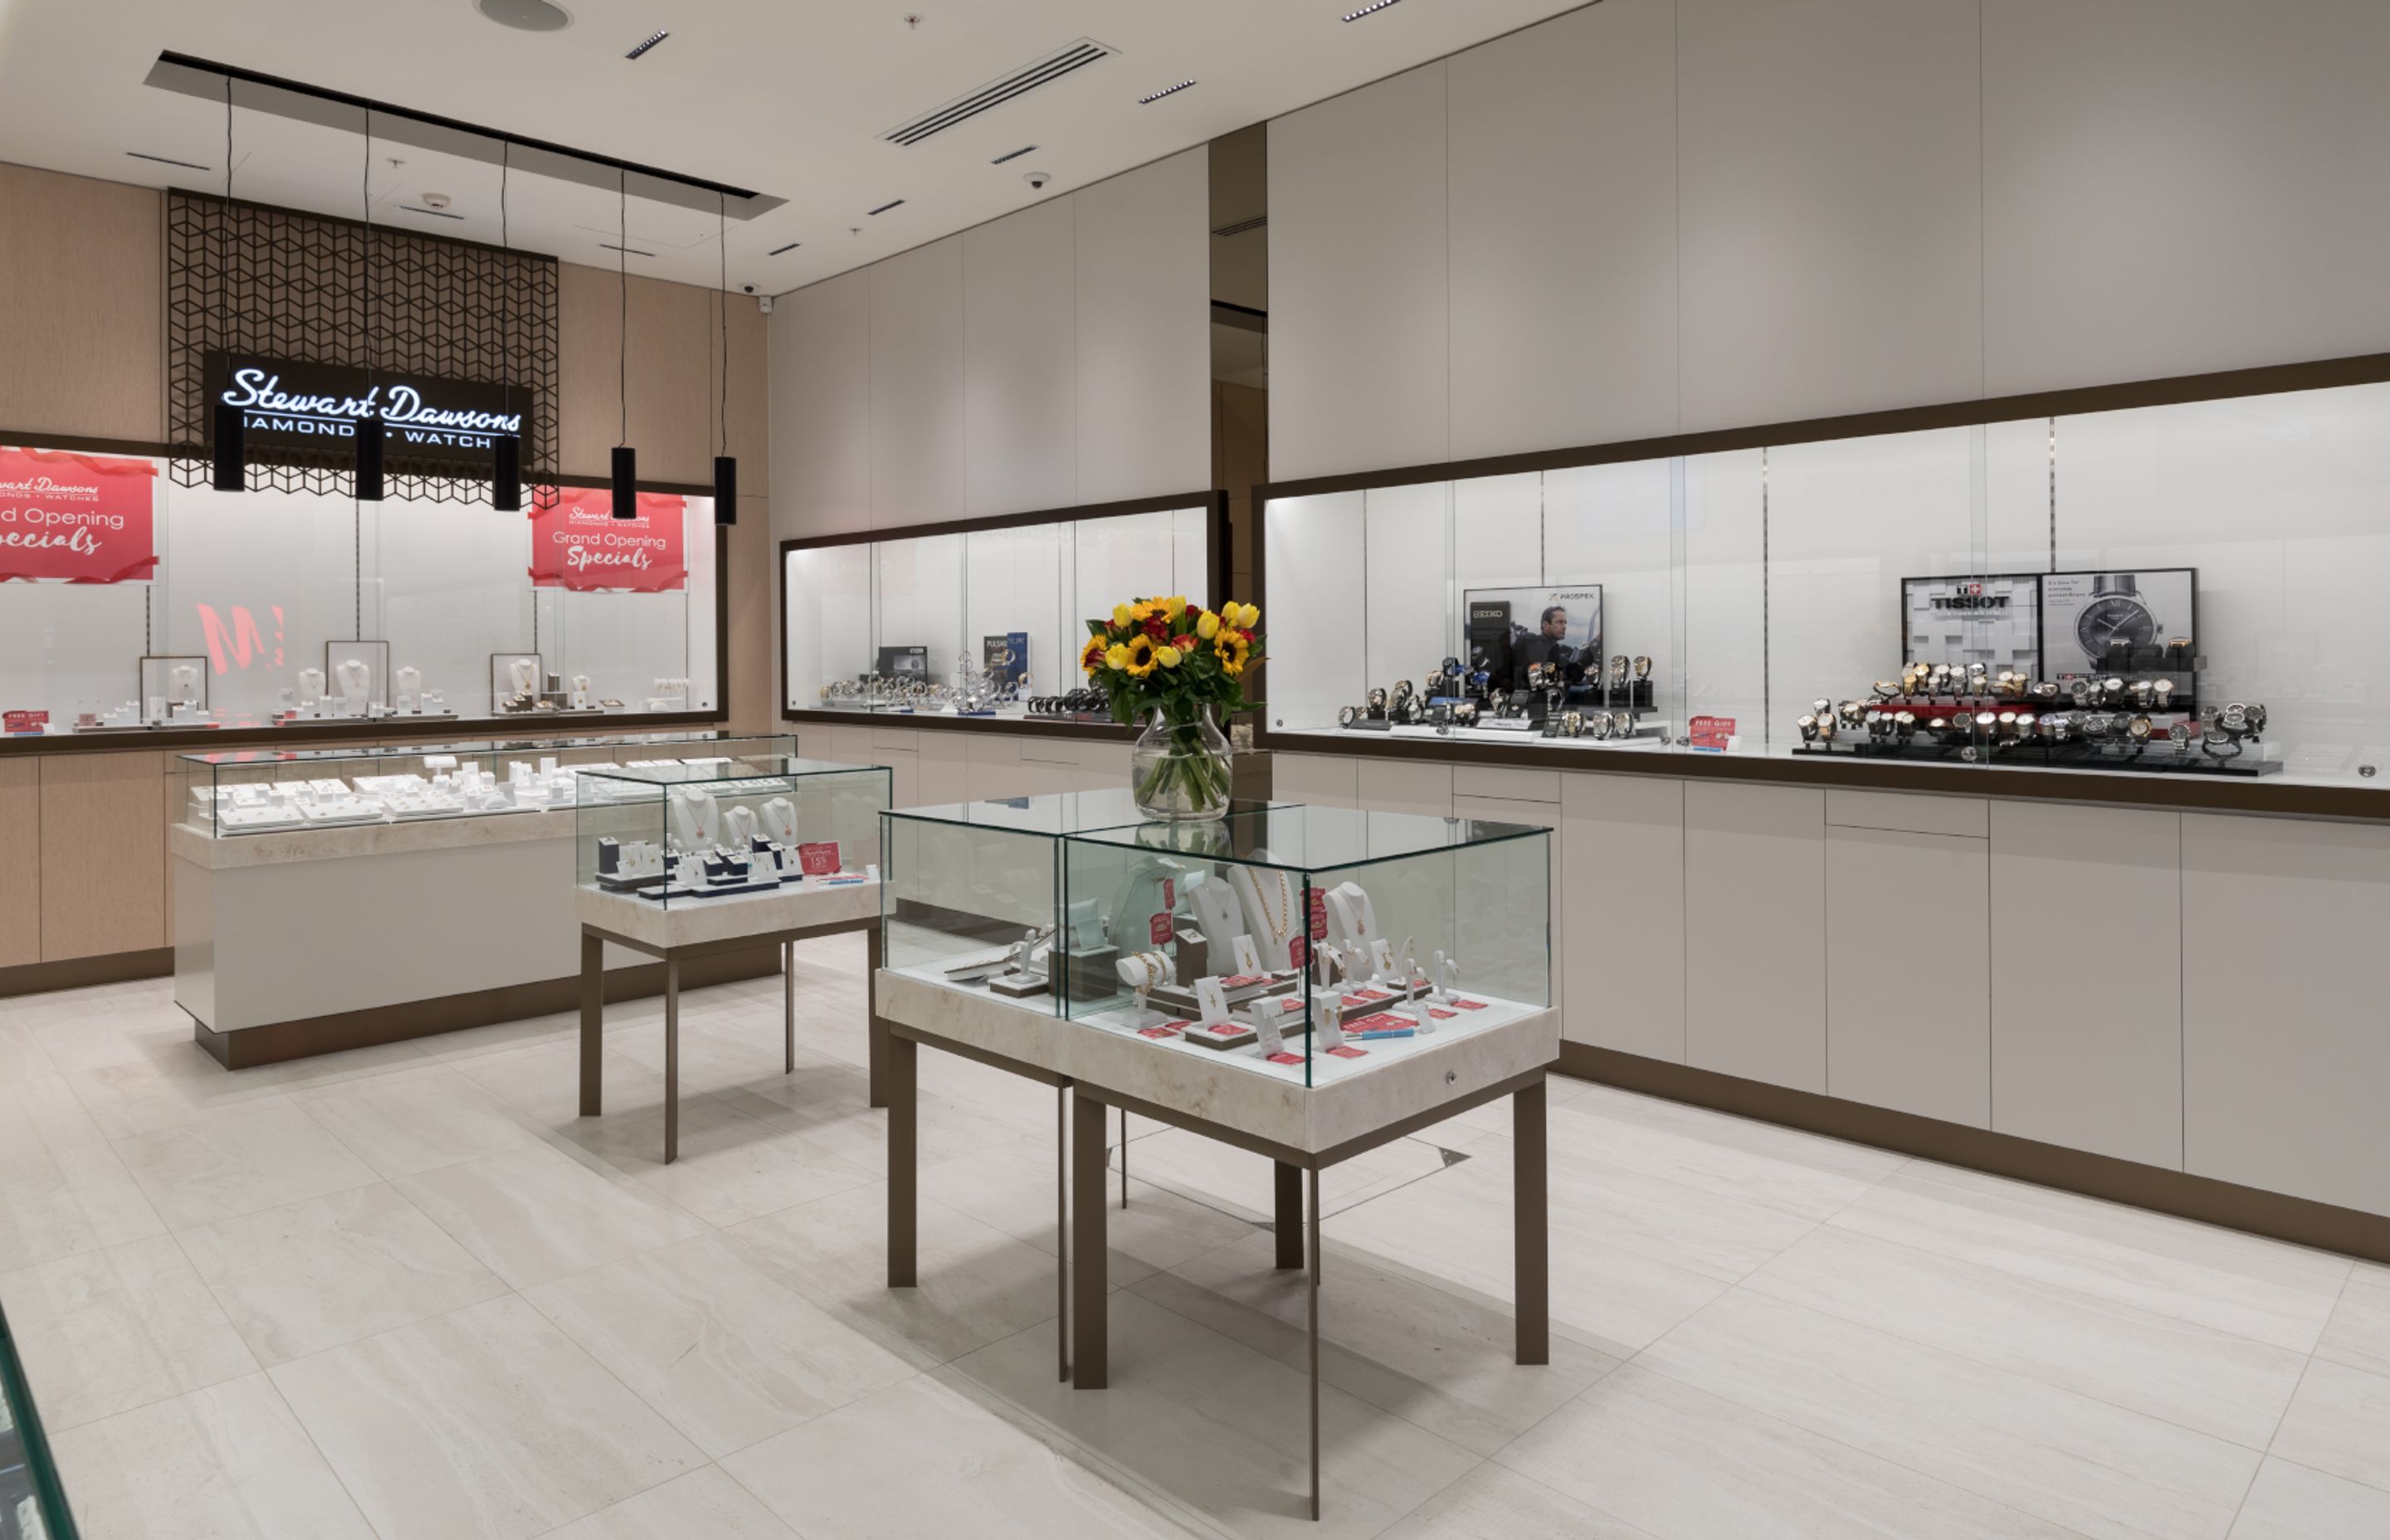 This Stewart Dawsons retail outlet demonstrates the ideal mix of general, accent and task lighting to create a cohesive lighting plan environment.